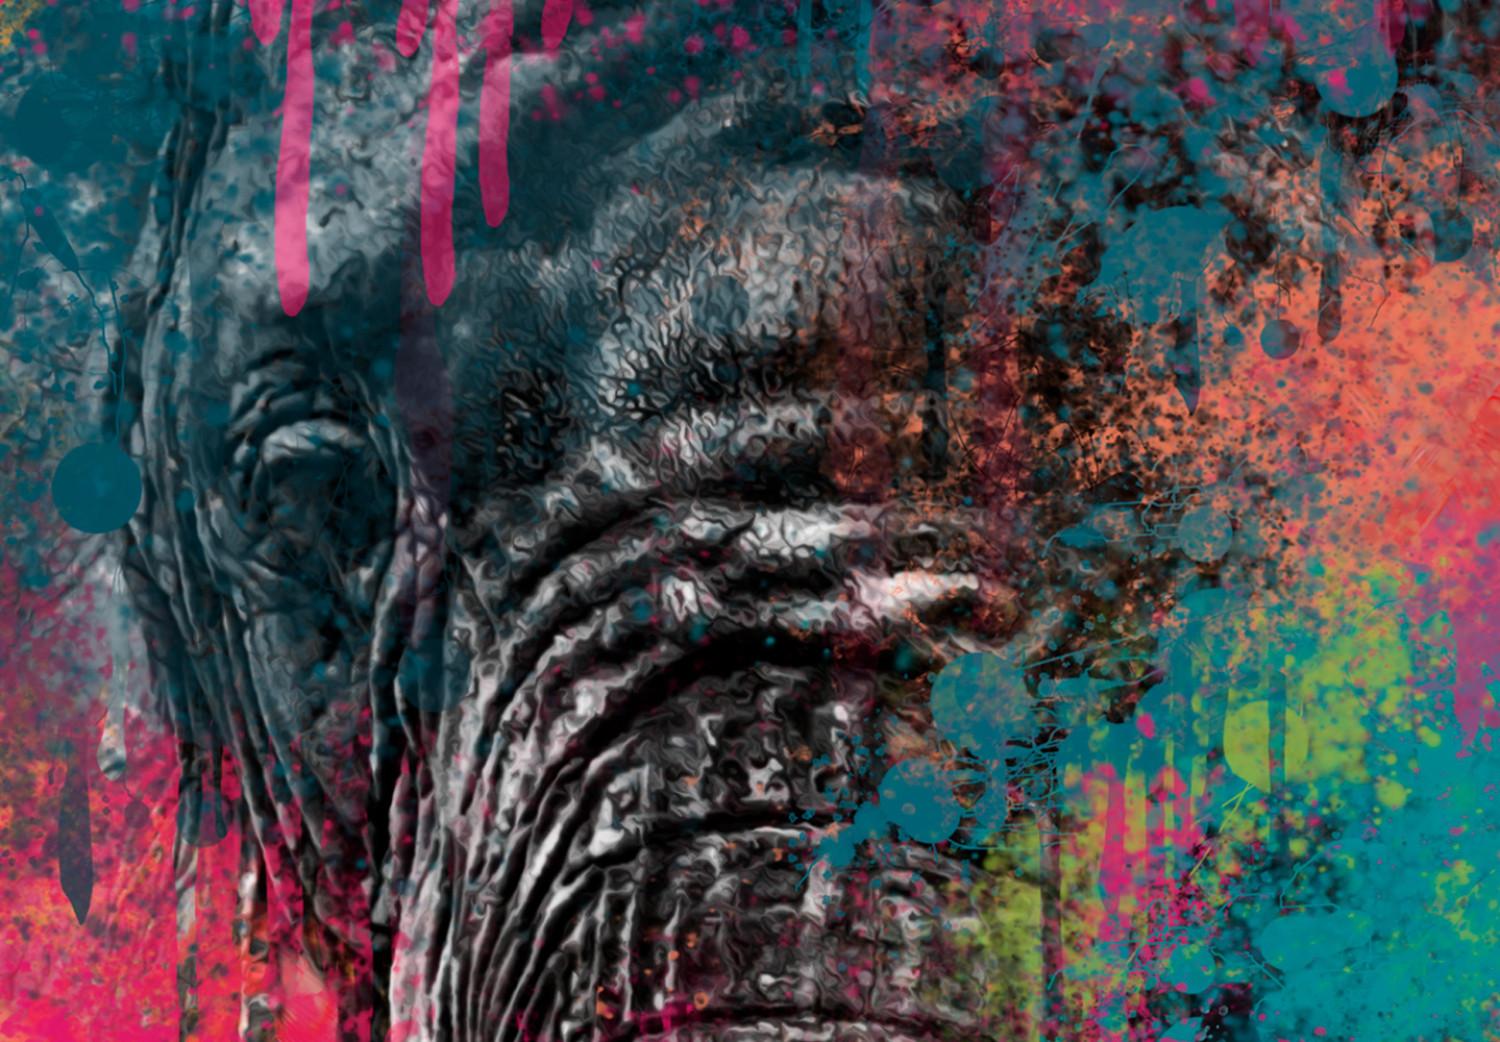 Poster Colorful Safari - multicolored elephant in a watercolor motif on a black background